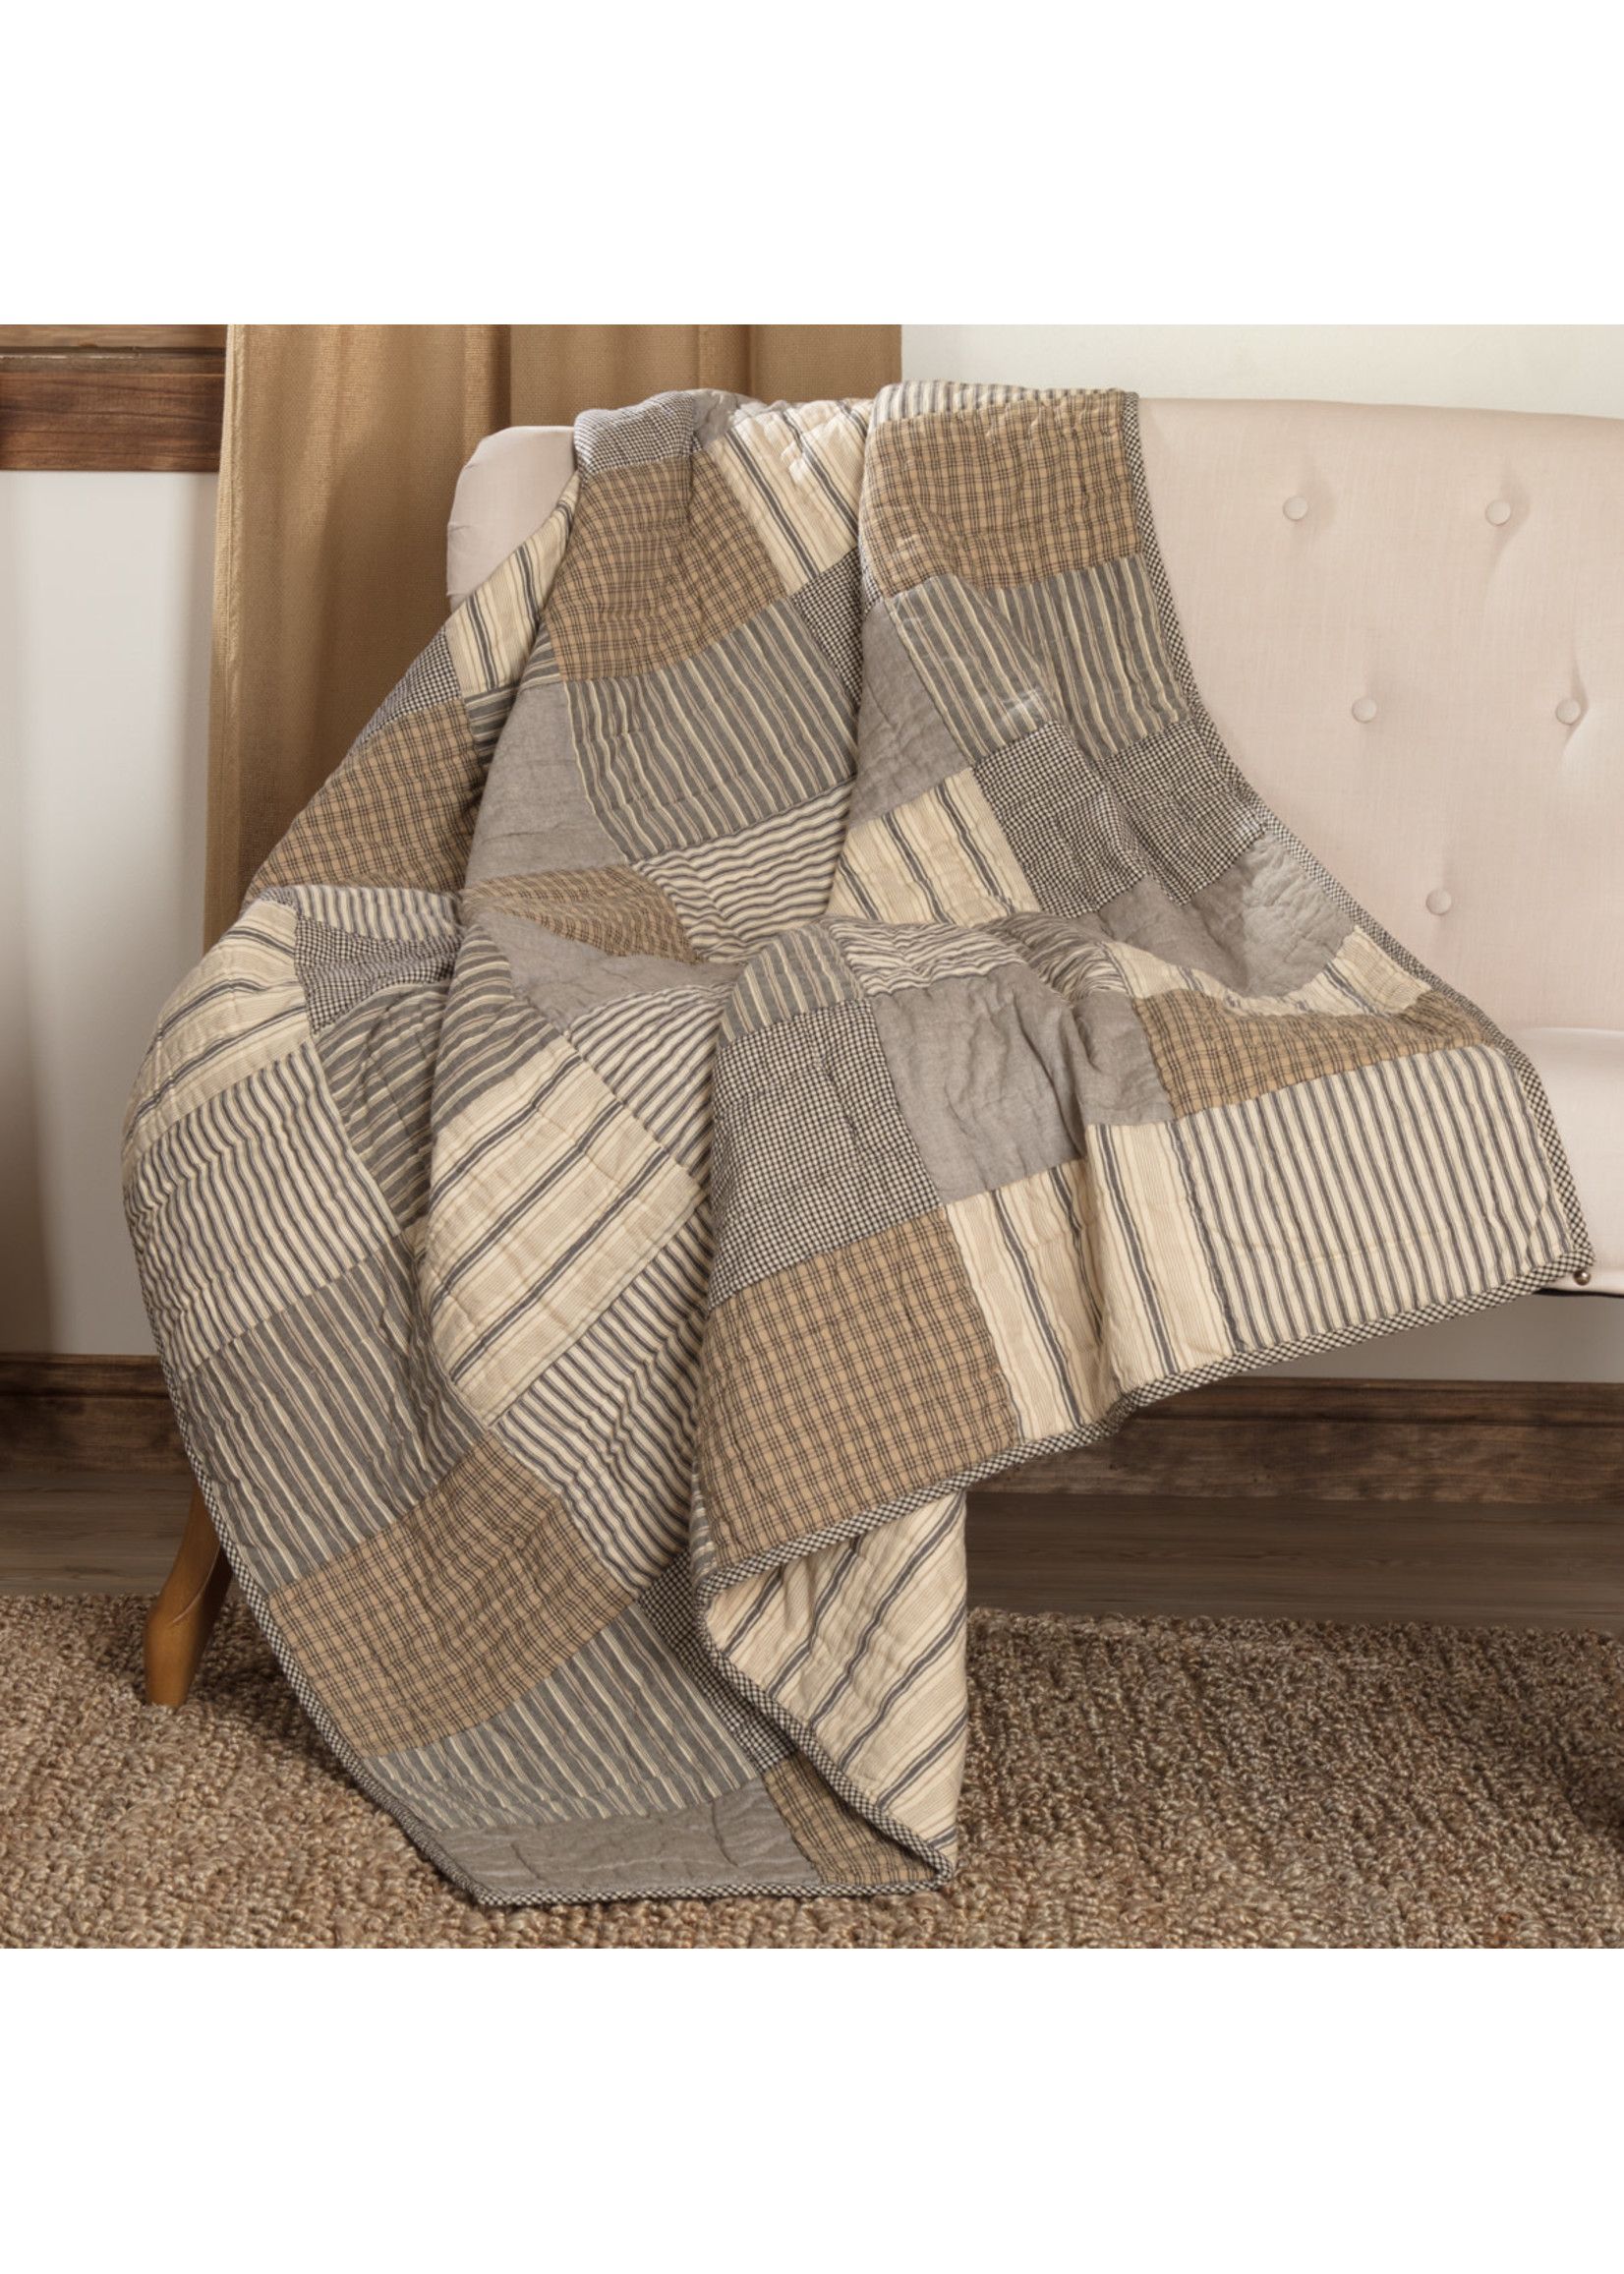 VHC SAWYER MILL CHARCOAL BLOCK QUILTED THROW